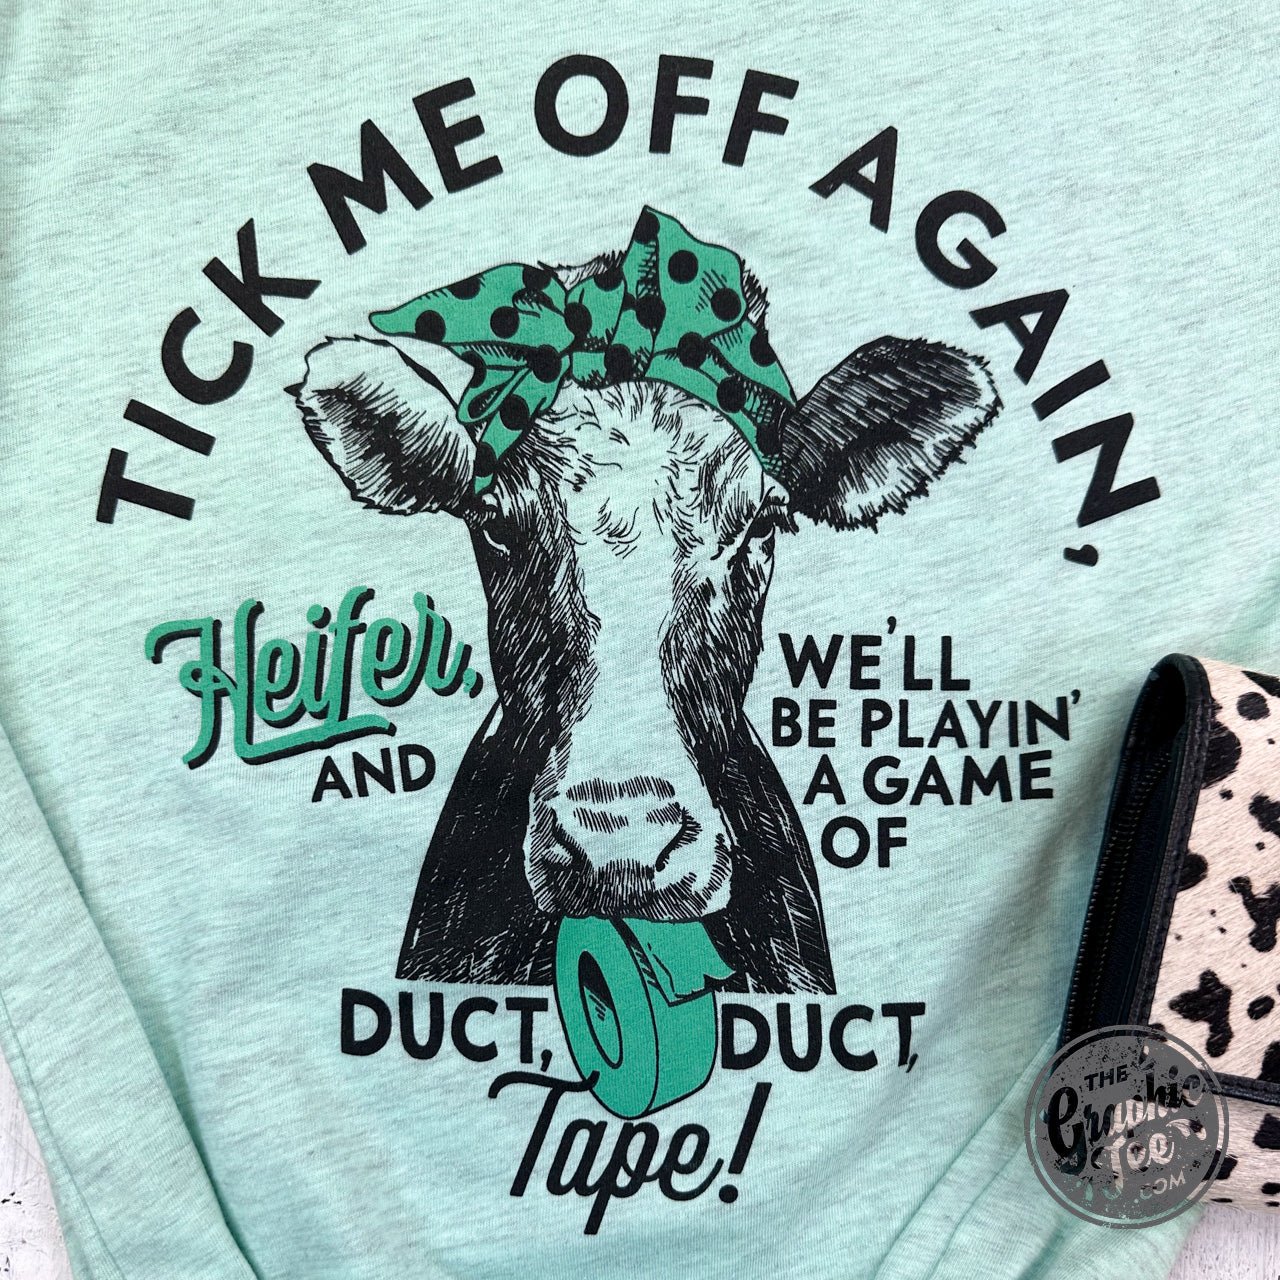 Tick Me Off Again, Heifer Short Sleeve Heather Prism Mint Tee - The Graphic Tee